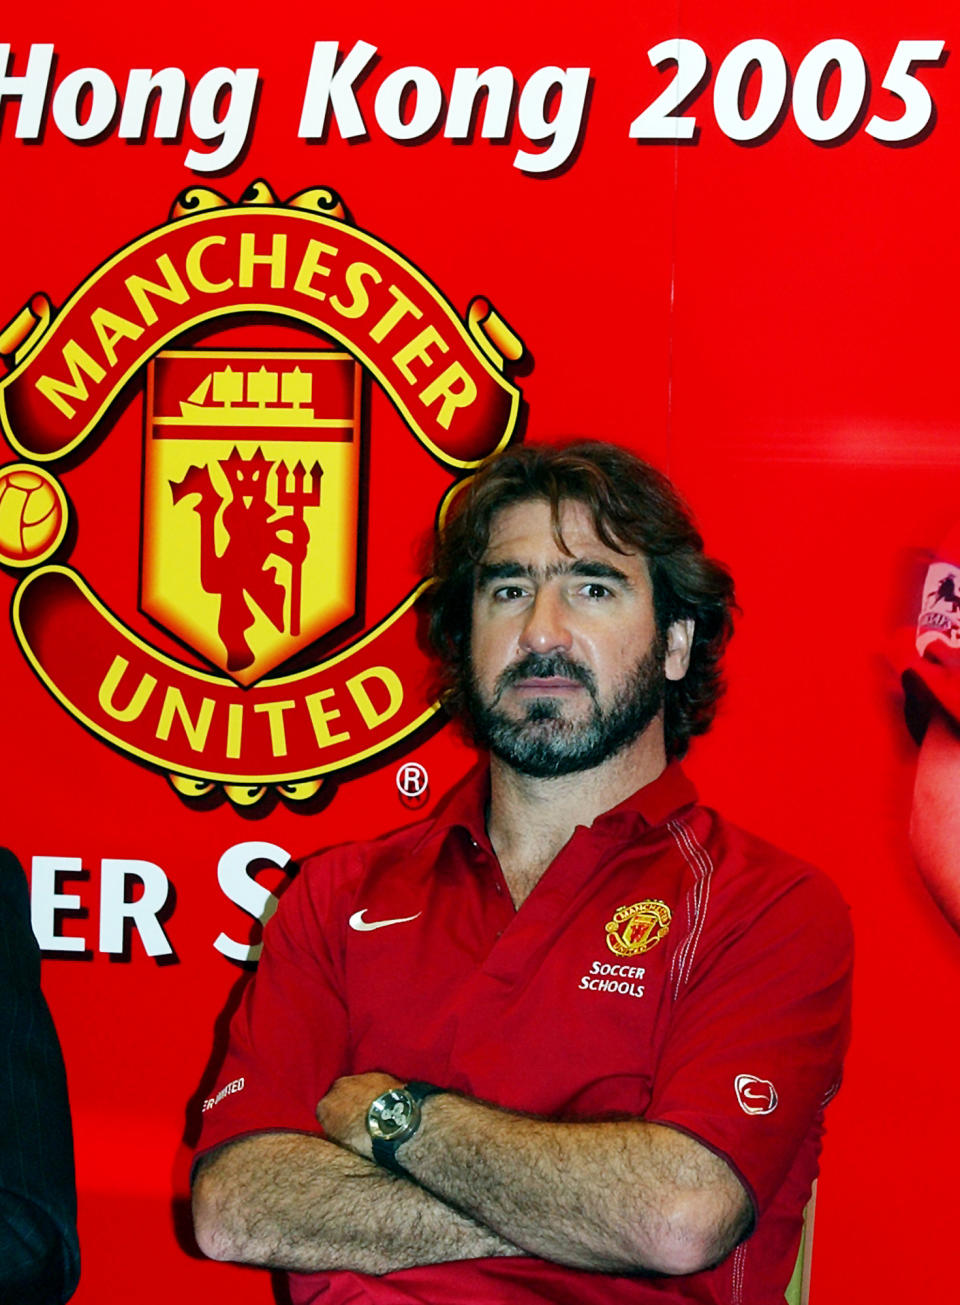 Former captain of Manchester United soccer team Eric Cantona attends at a news conference in Hong Kong, Wednesday, July 20, 2005. Cantona is in the territory to promote Manchester United Soccer School in Hong Kong. (AP Photo/Lo Sai Hung)